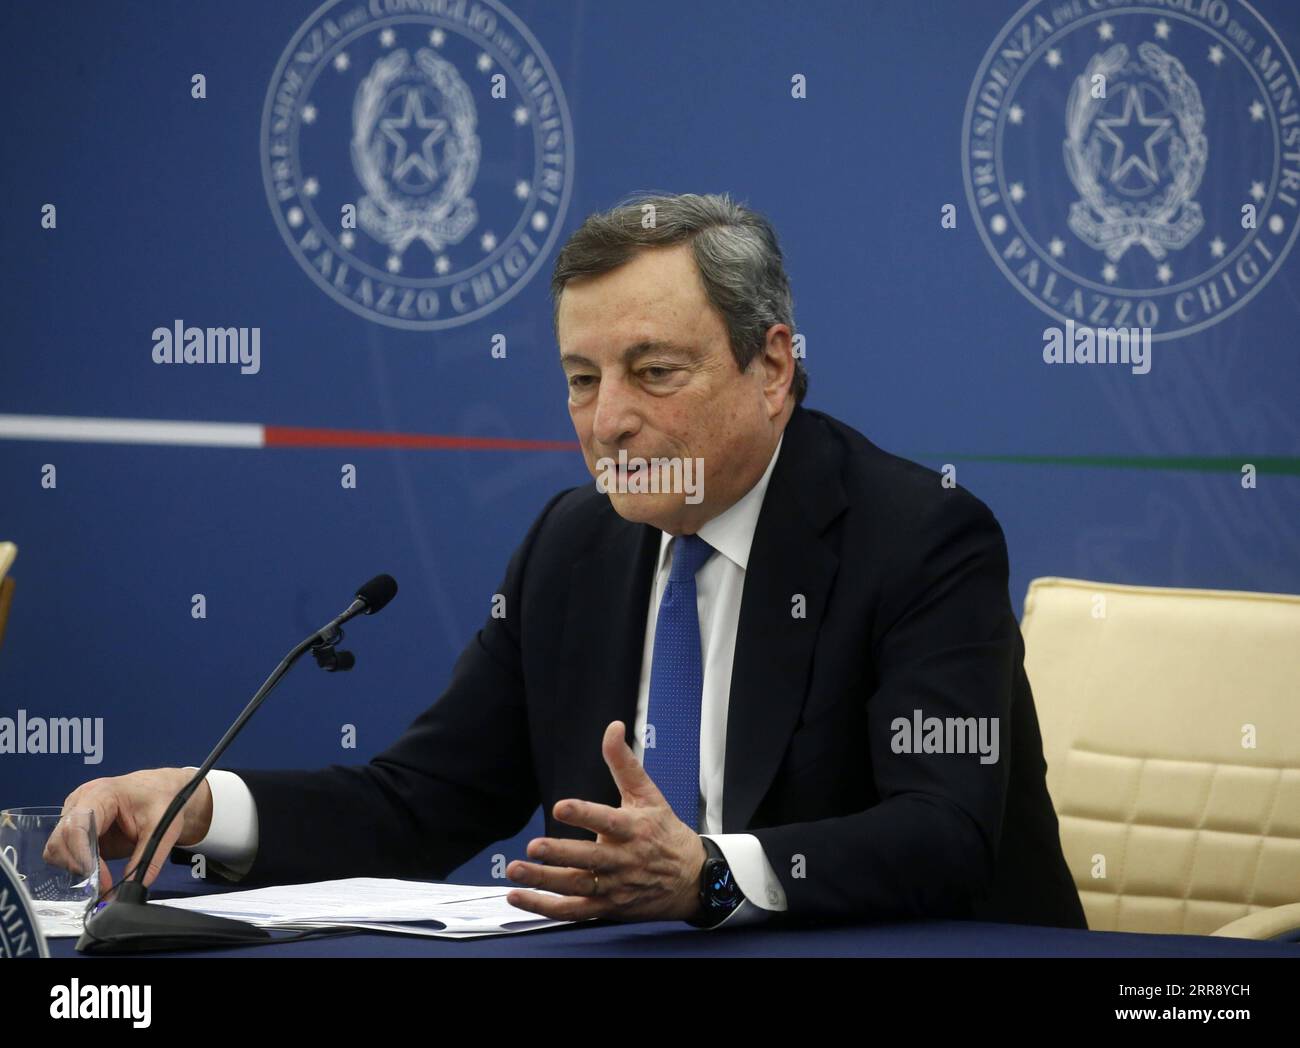 210520 -- ROME, May 20, 2021 -- Italian Prime Minister Mario Draghi speaks at a news conference in Rome, Italy, on May 20, 2021. The Italian government on Thursday approved a 40-billion-euro 48.9-billion-U.S. dollar relief package to support the country s businesses and workers affected by the COVID-19 restrictions. The new relief measures included 17 billion euros of financial aid to companies, and nine billion euros for business credit support, according to Prime Minister Mario Draghi. Str/Xinhua ITALY-ROME-PM-ECONOMY-STIMULUS Stringer PUBLICATIONxNOTxINxCHN Stock Photo